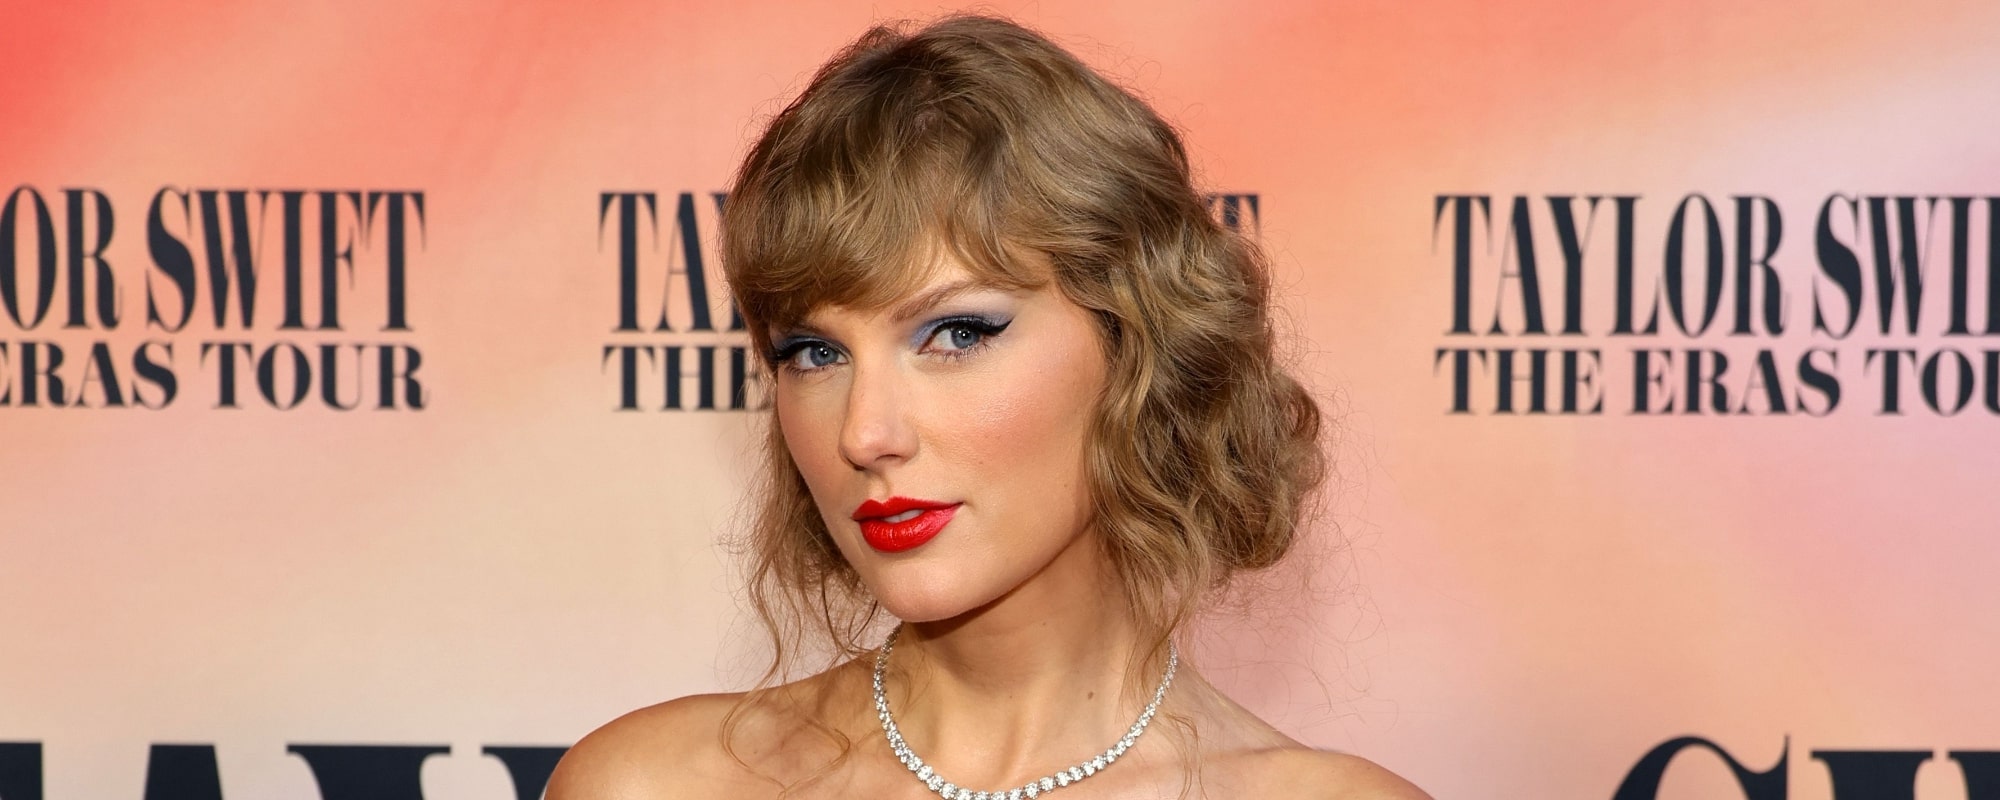 Taylor Swift Makes History as She’s Crowned Time’s Person of the Year